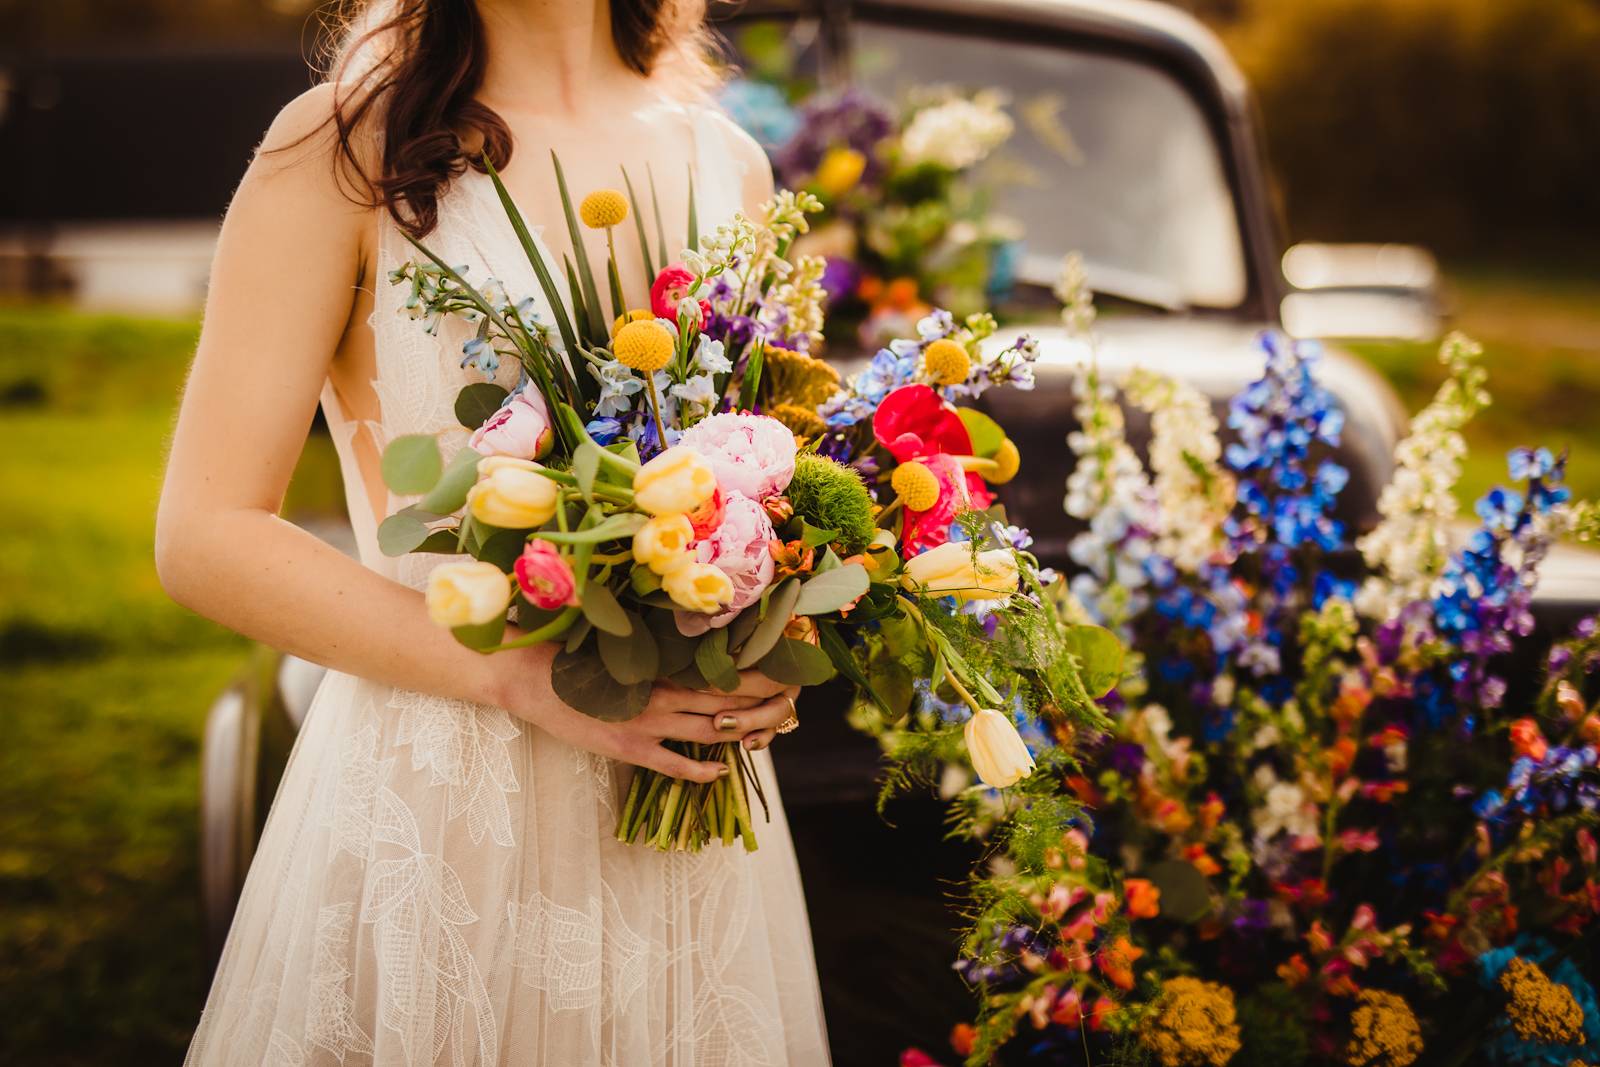 Vintage Truck with Wedding Floral